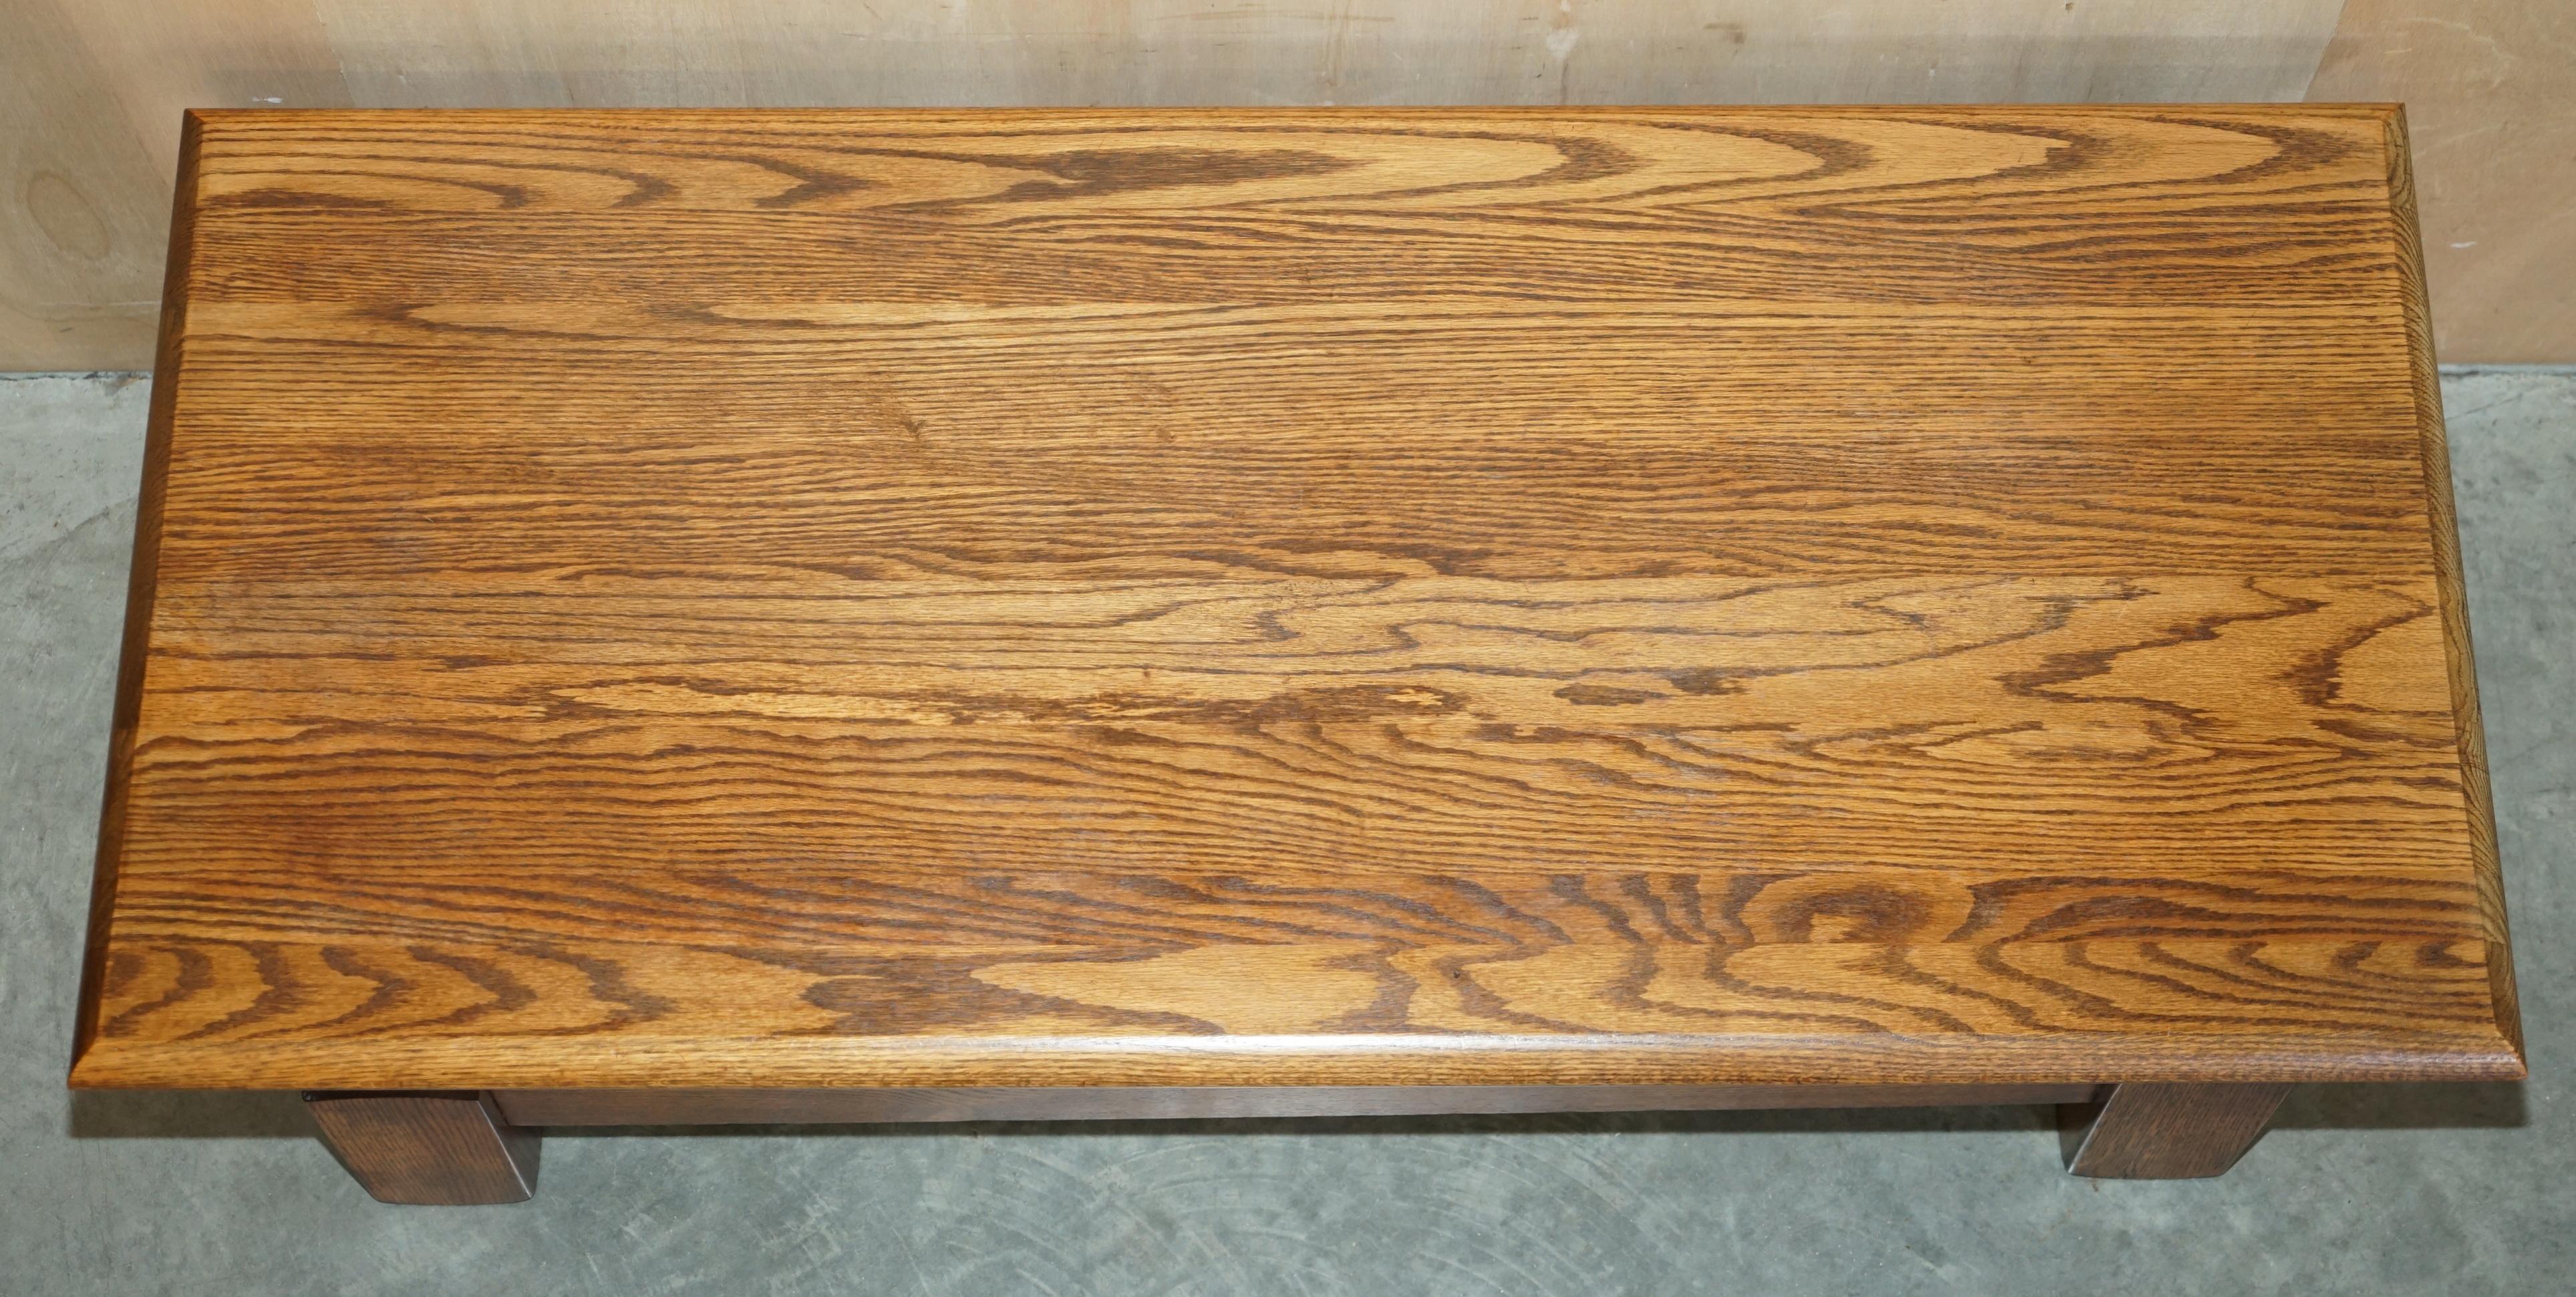 Mid-20th Century Vintage English Oak Coffee Table Made in the Style of Edwardian Refectory Tables For Sale